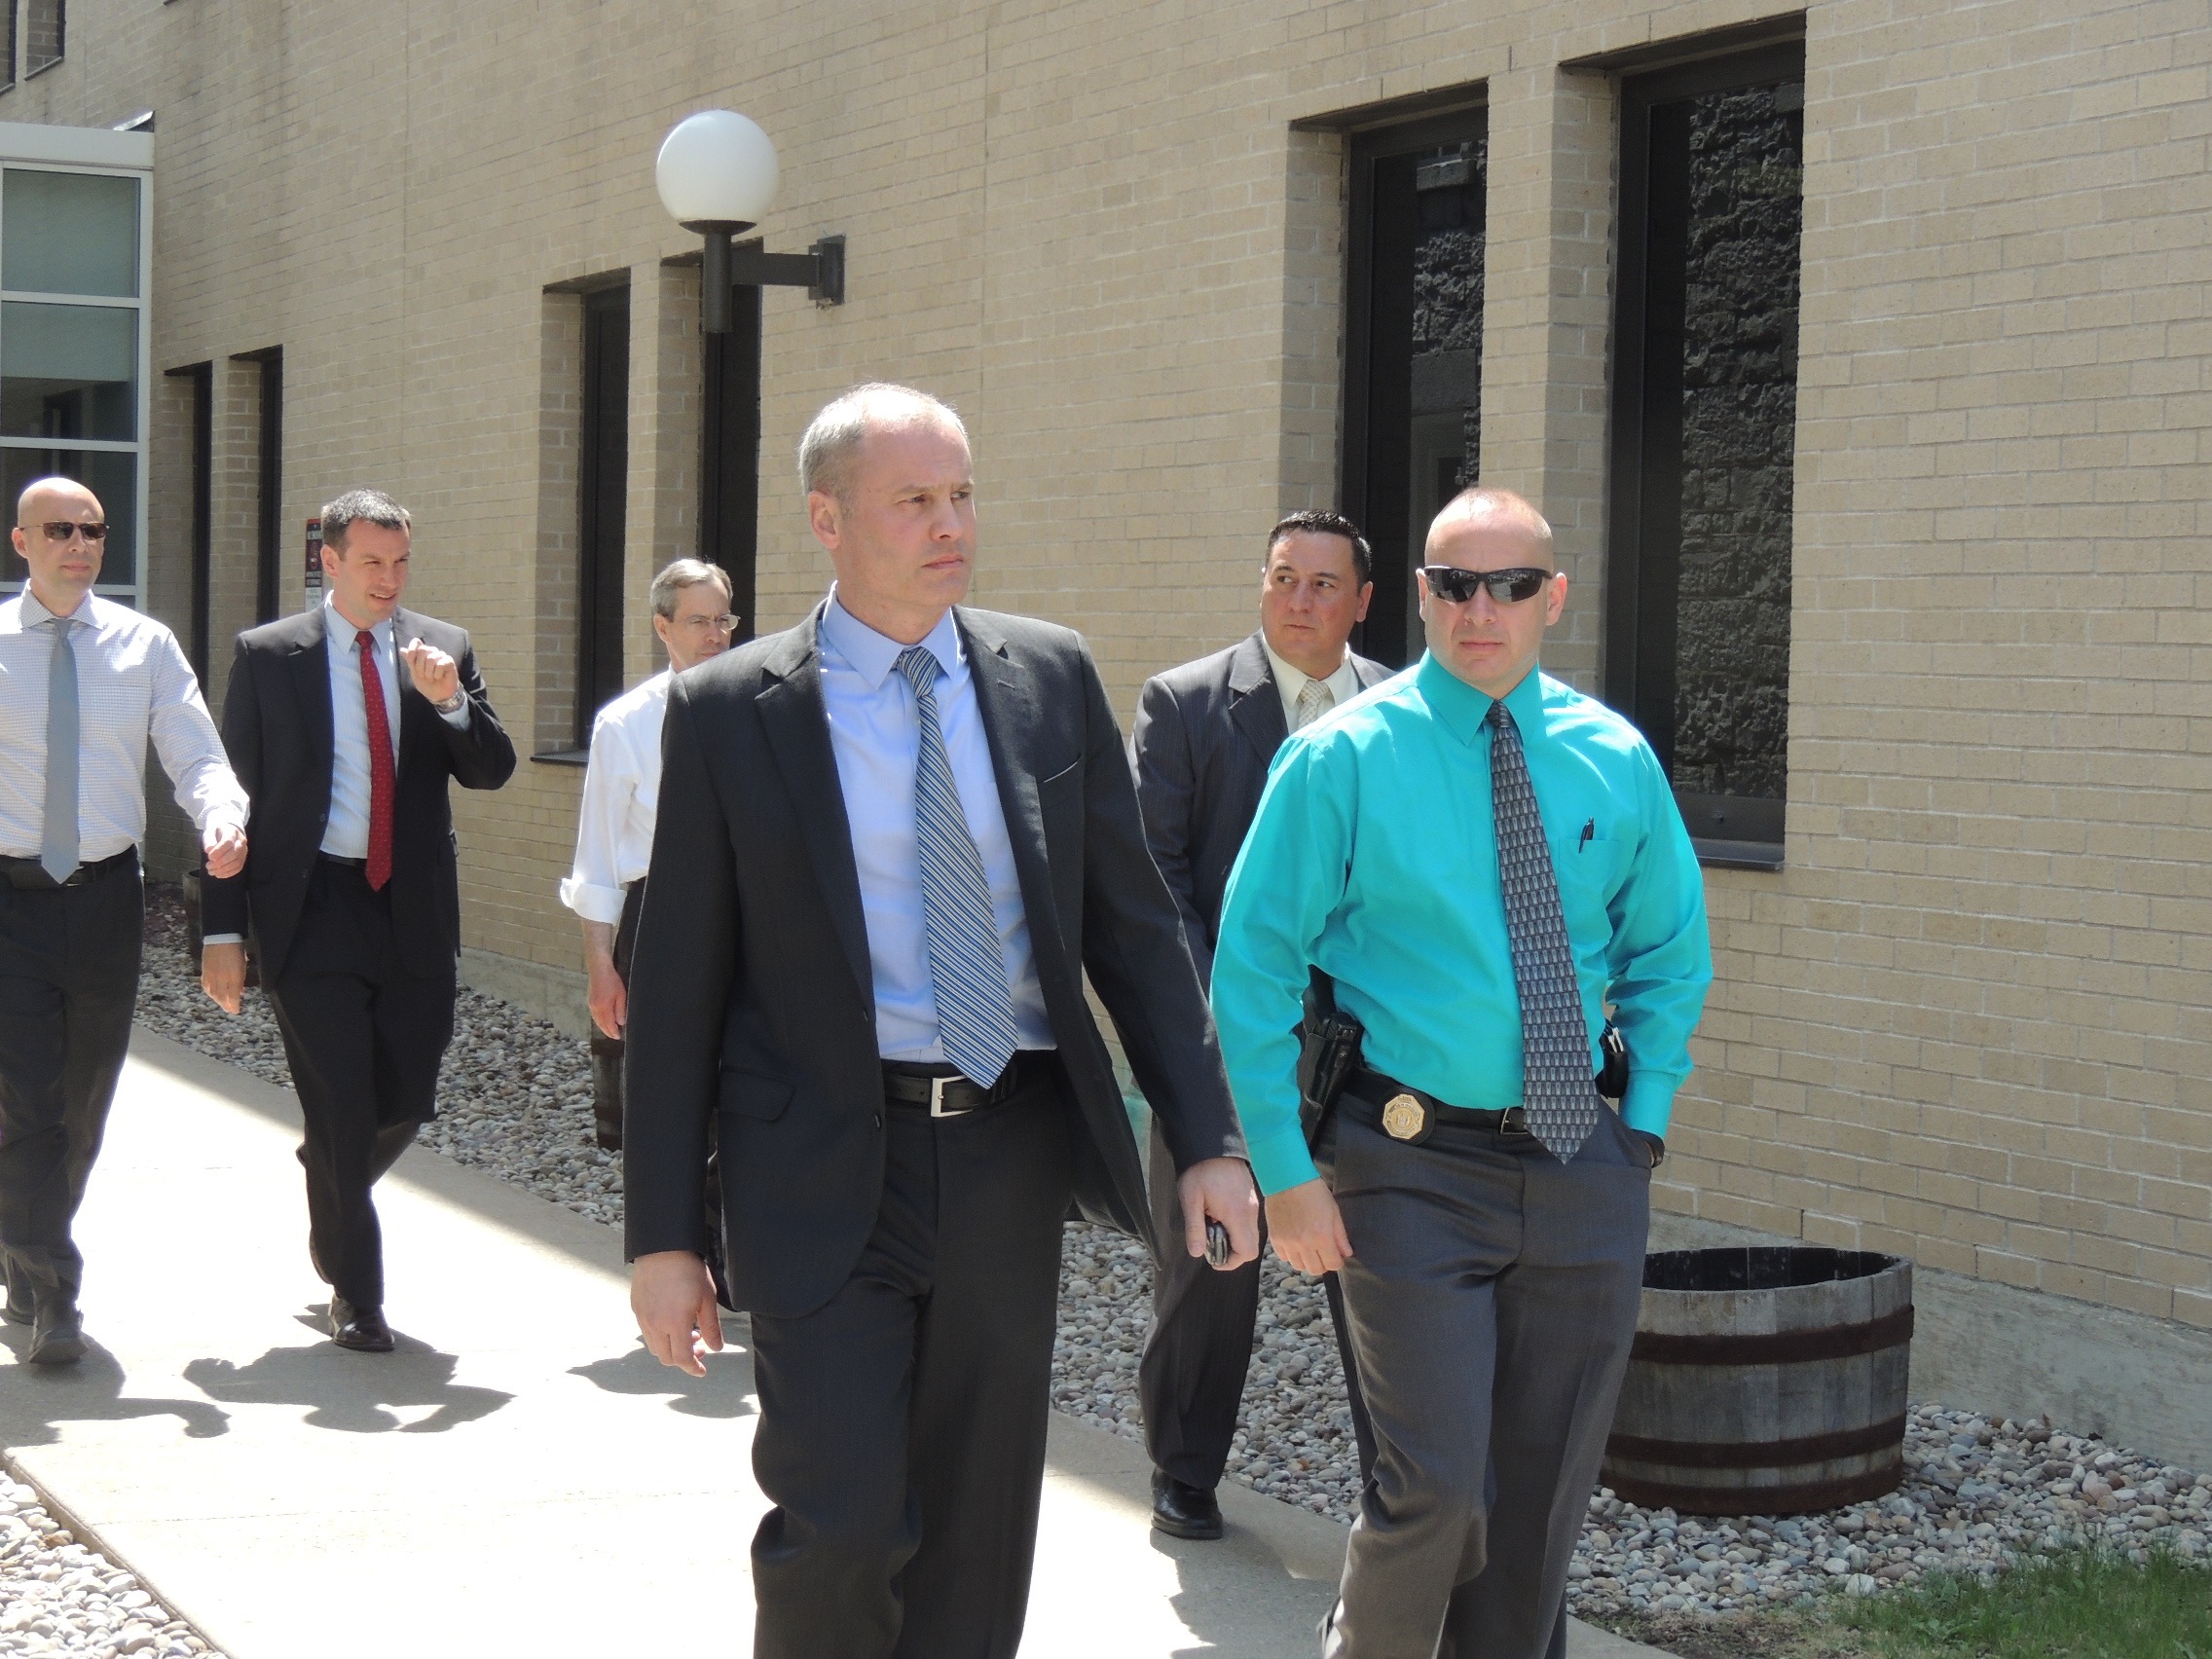 Jury deadlocks on Tuesday; judge delivers Allen Charge